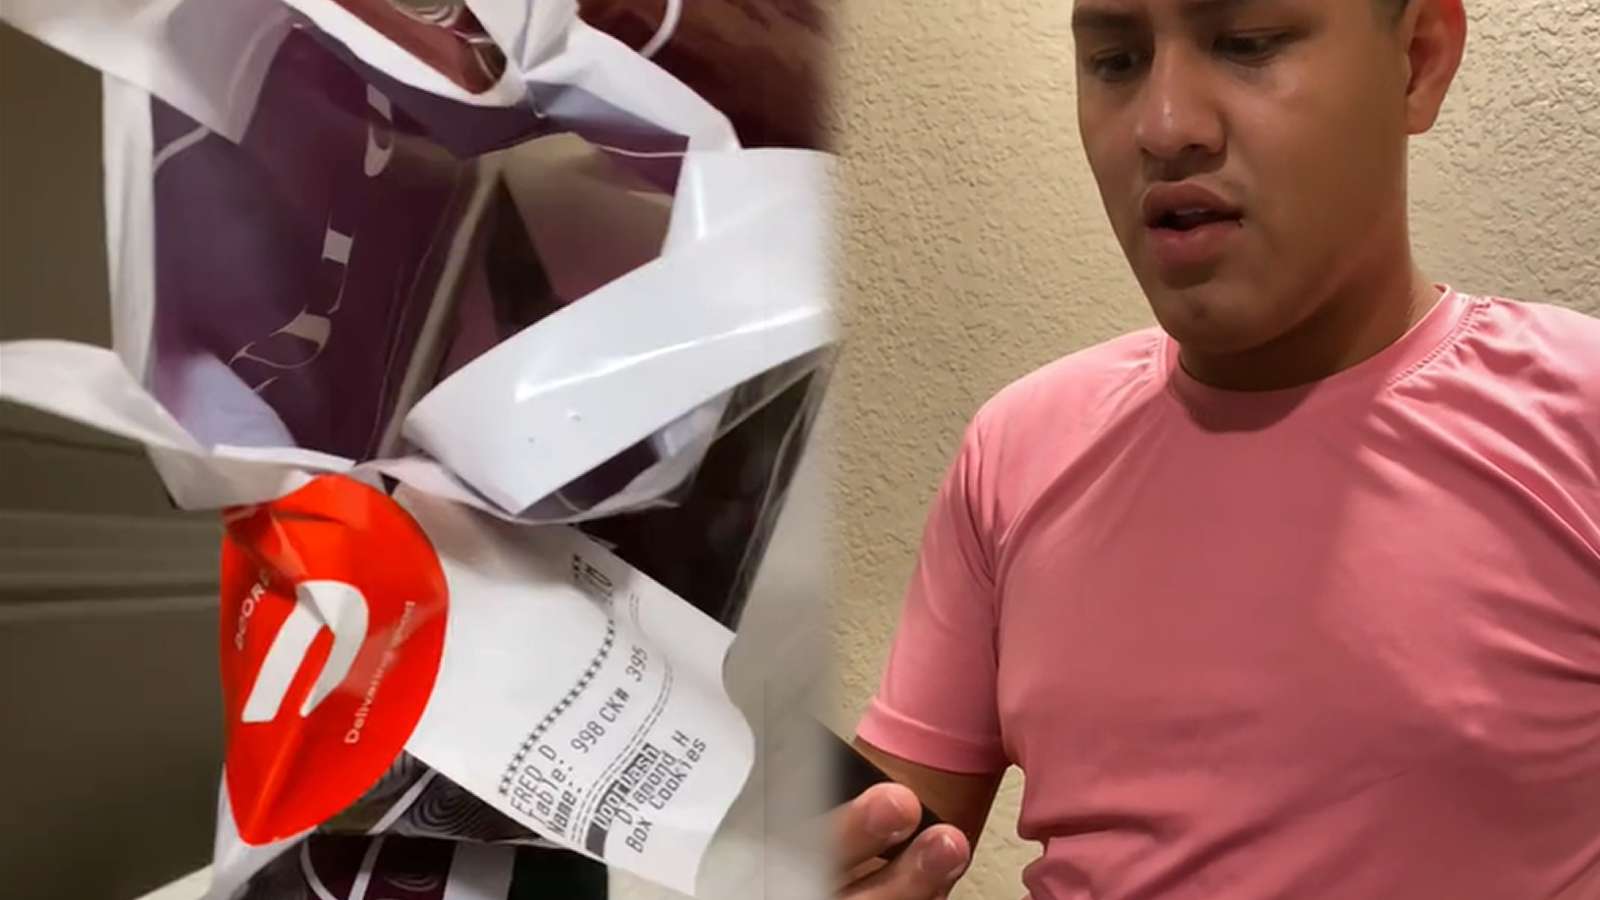 DoorDash customer goes viral after confronting driver over eaten cookies